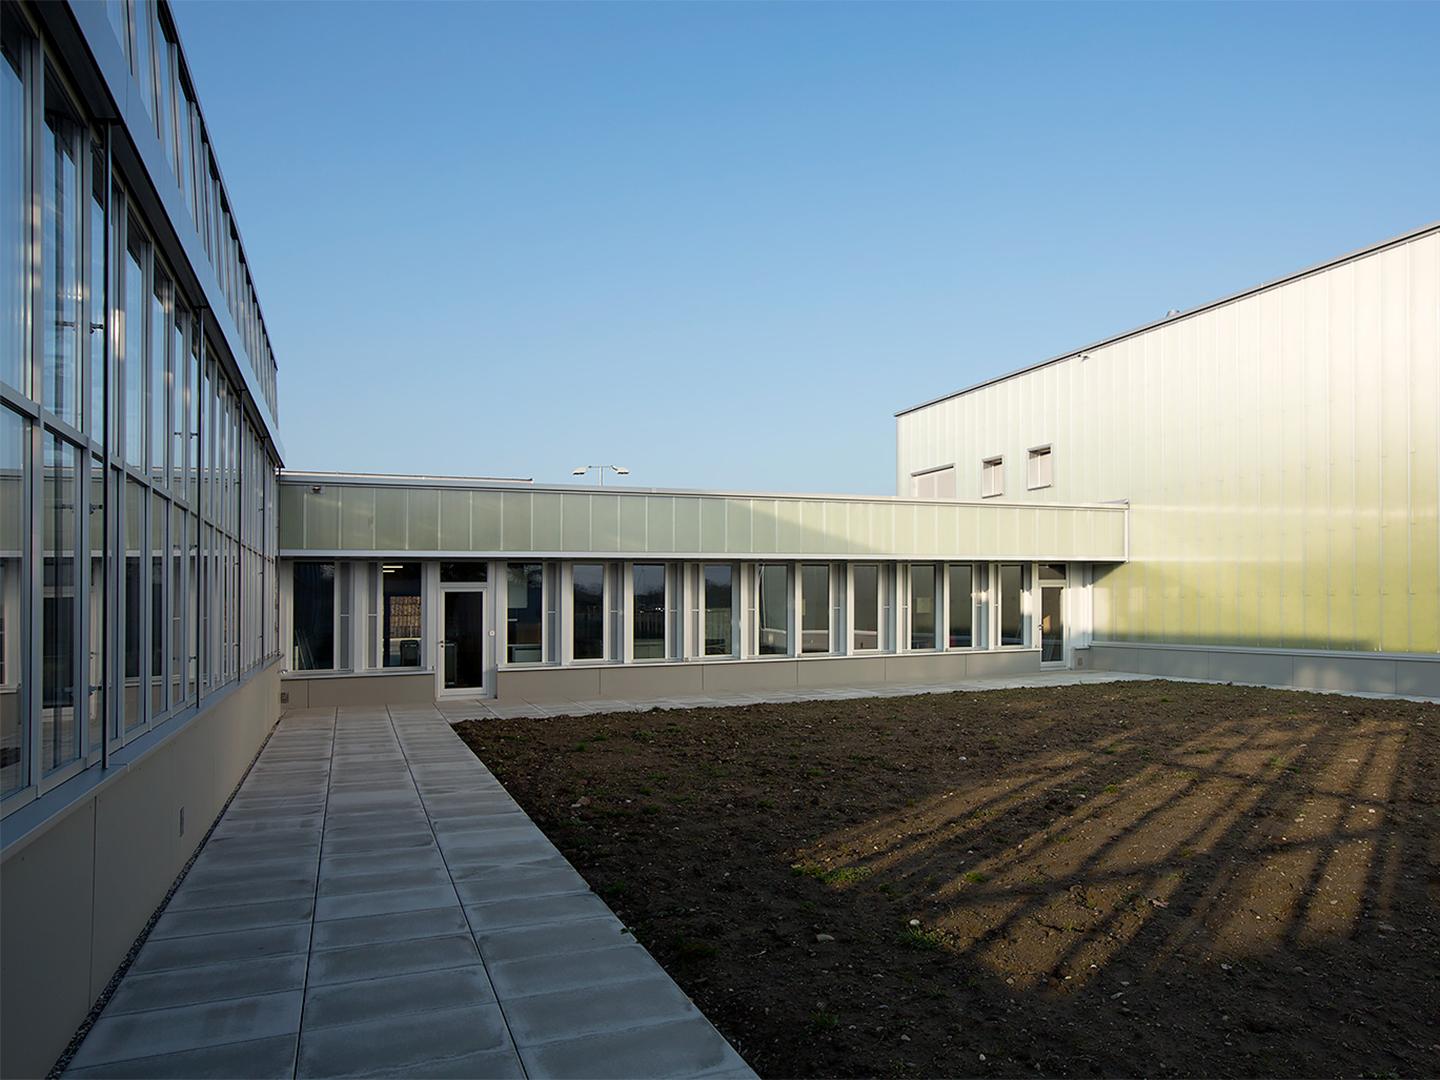 Greenhouse for tuition and research for the university of Berne, Untere Zollstrasse, Ostermundigen